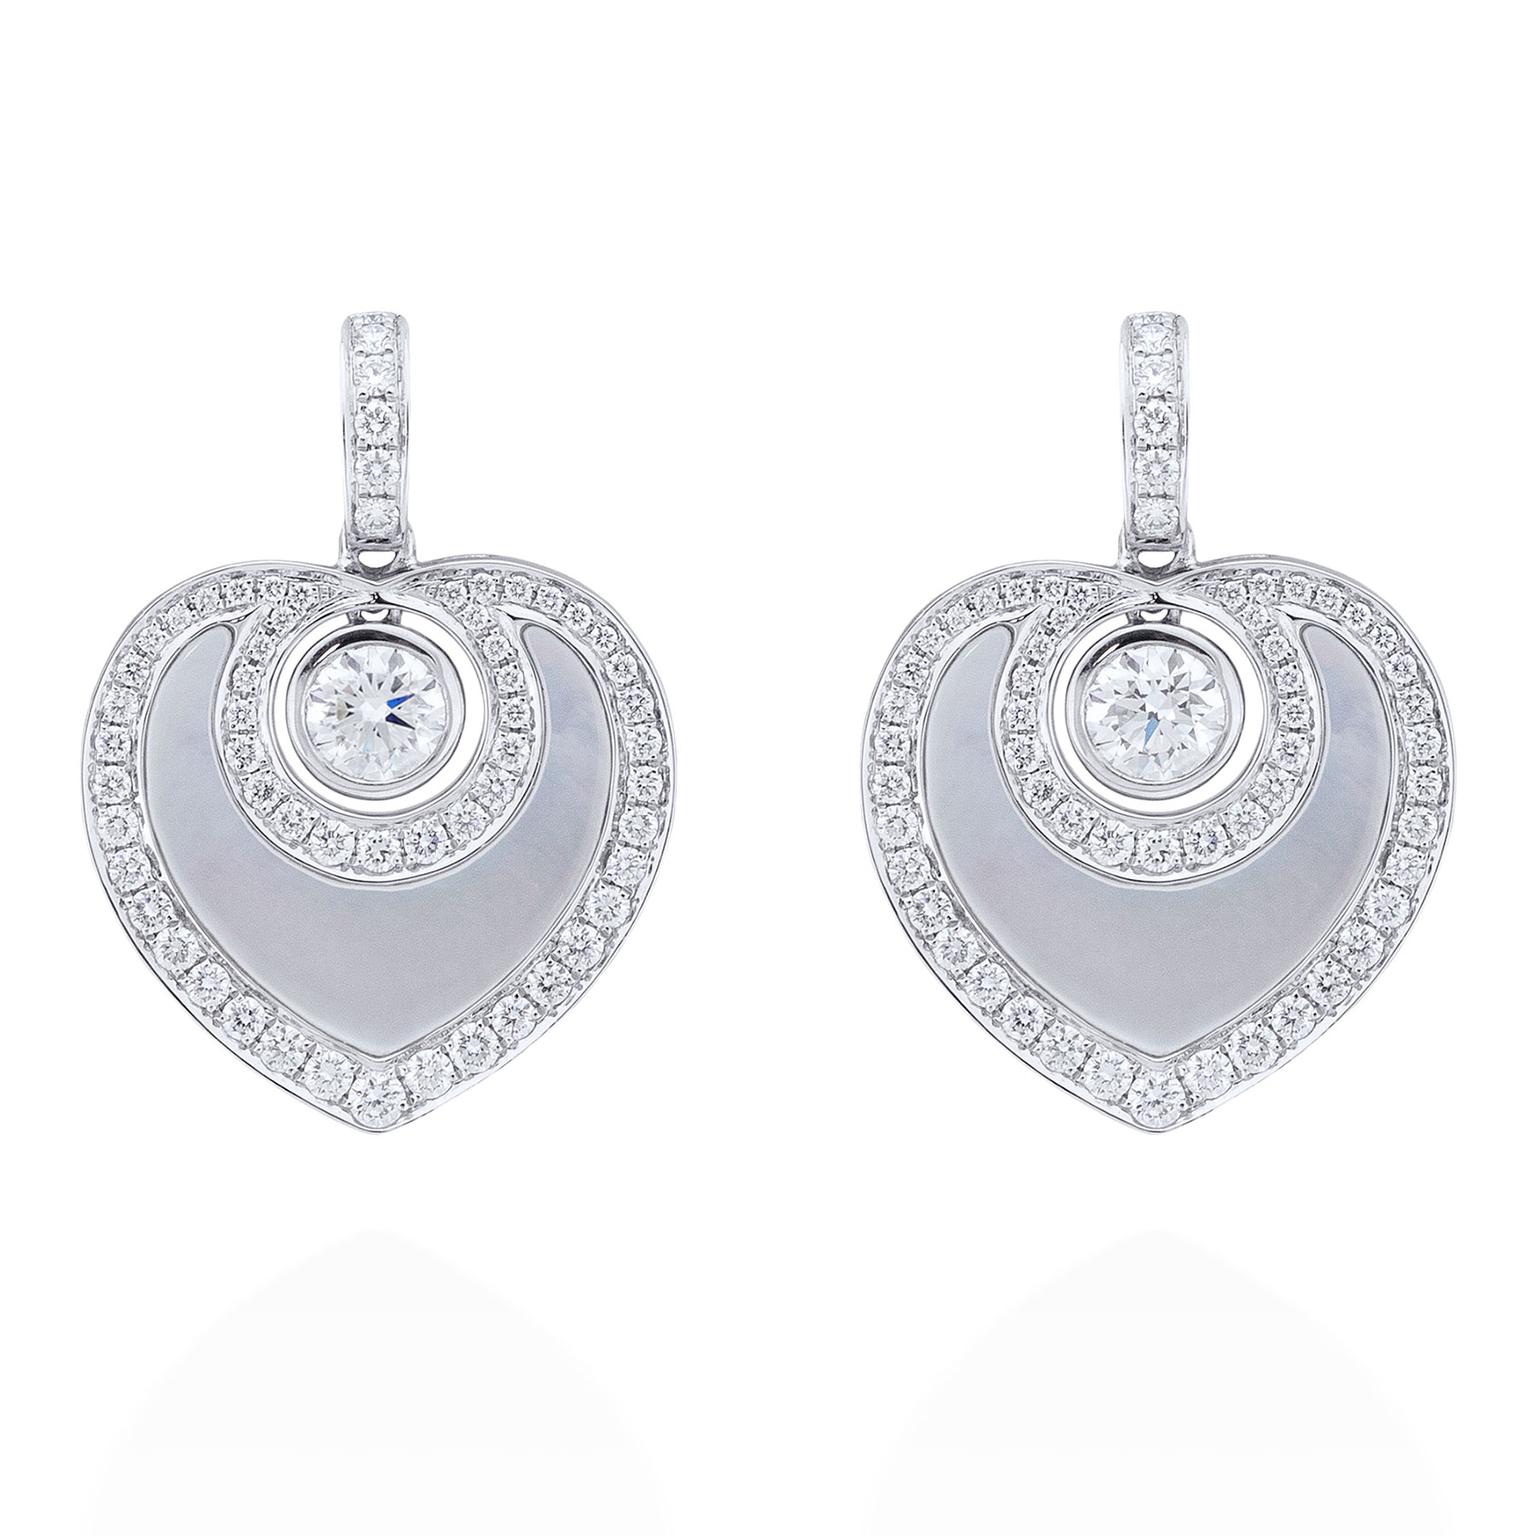 Boodles Sophie platinum, diamond and grey mother-of-pearl earrings